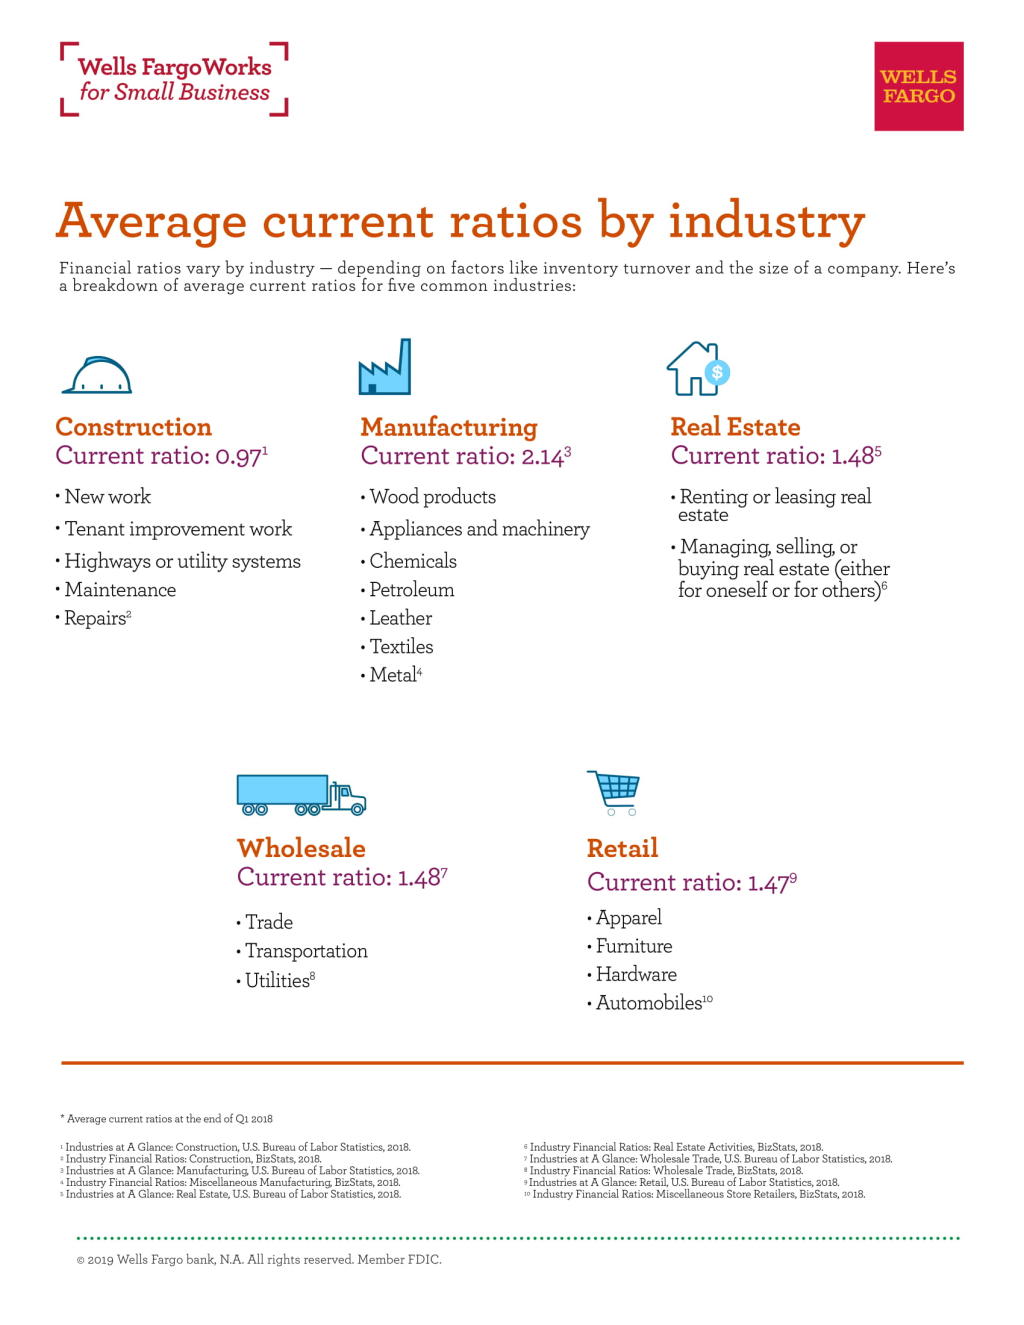 where to find industry average ratios